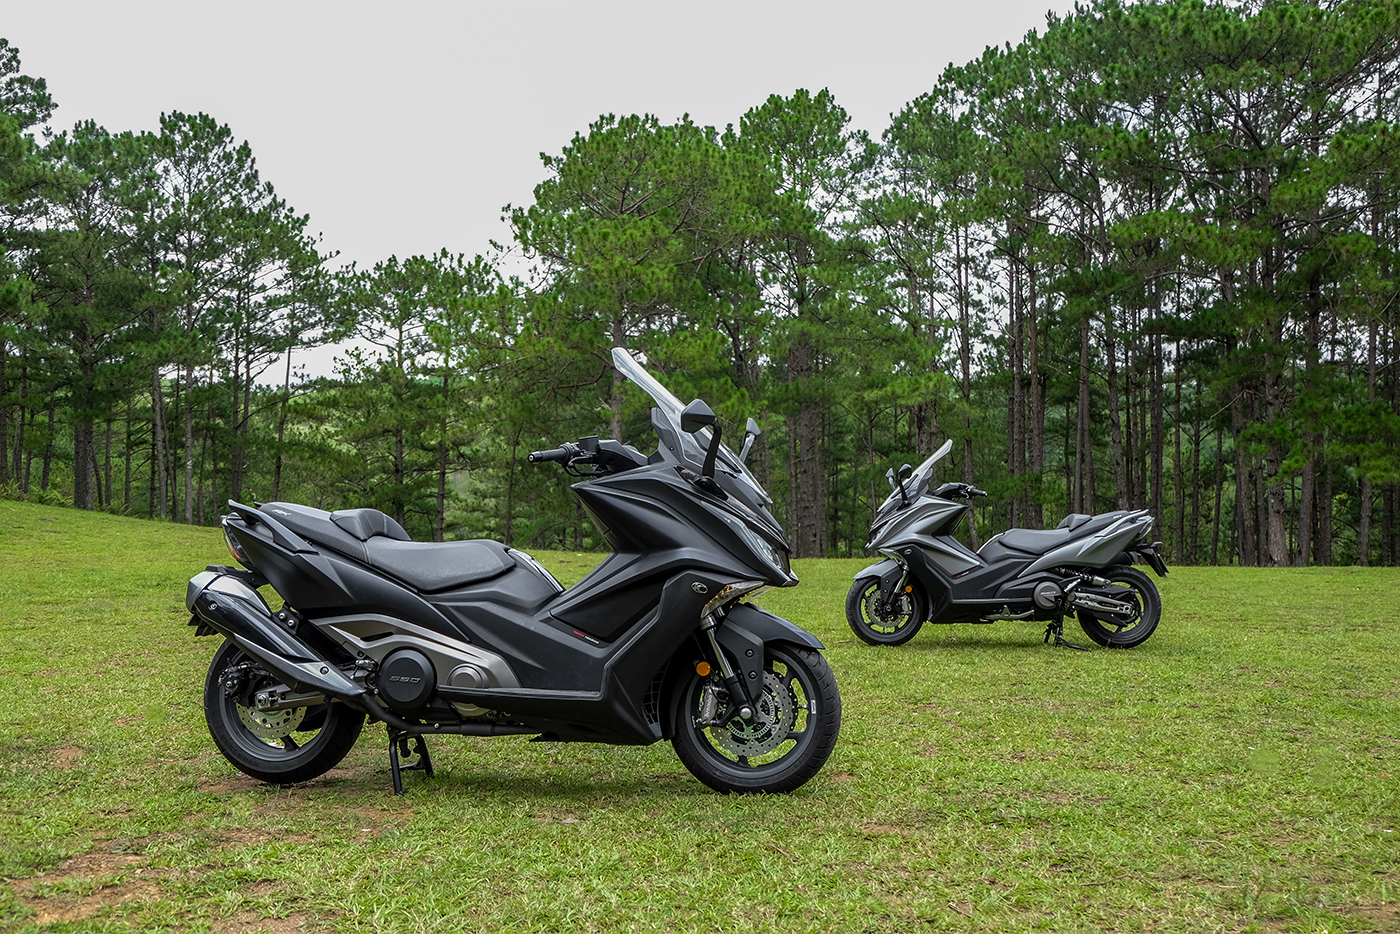 KYMCO AK 550 2023 gets a new look with the Premium version, taking on the Yamaha TMAX kymco-ak550-32.jpg